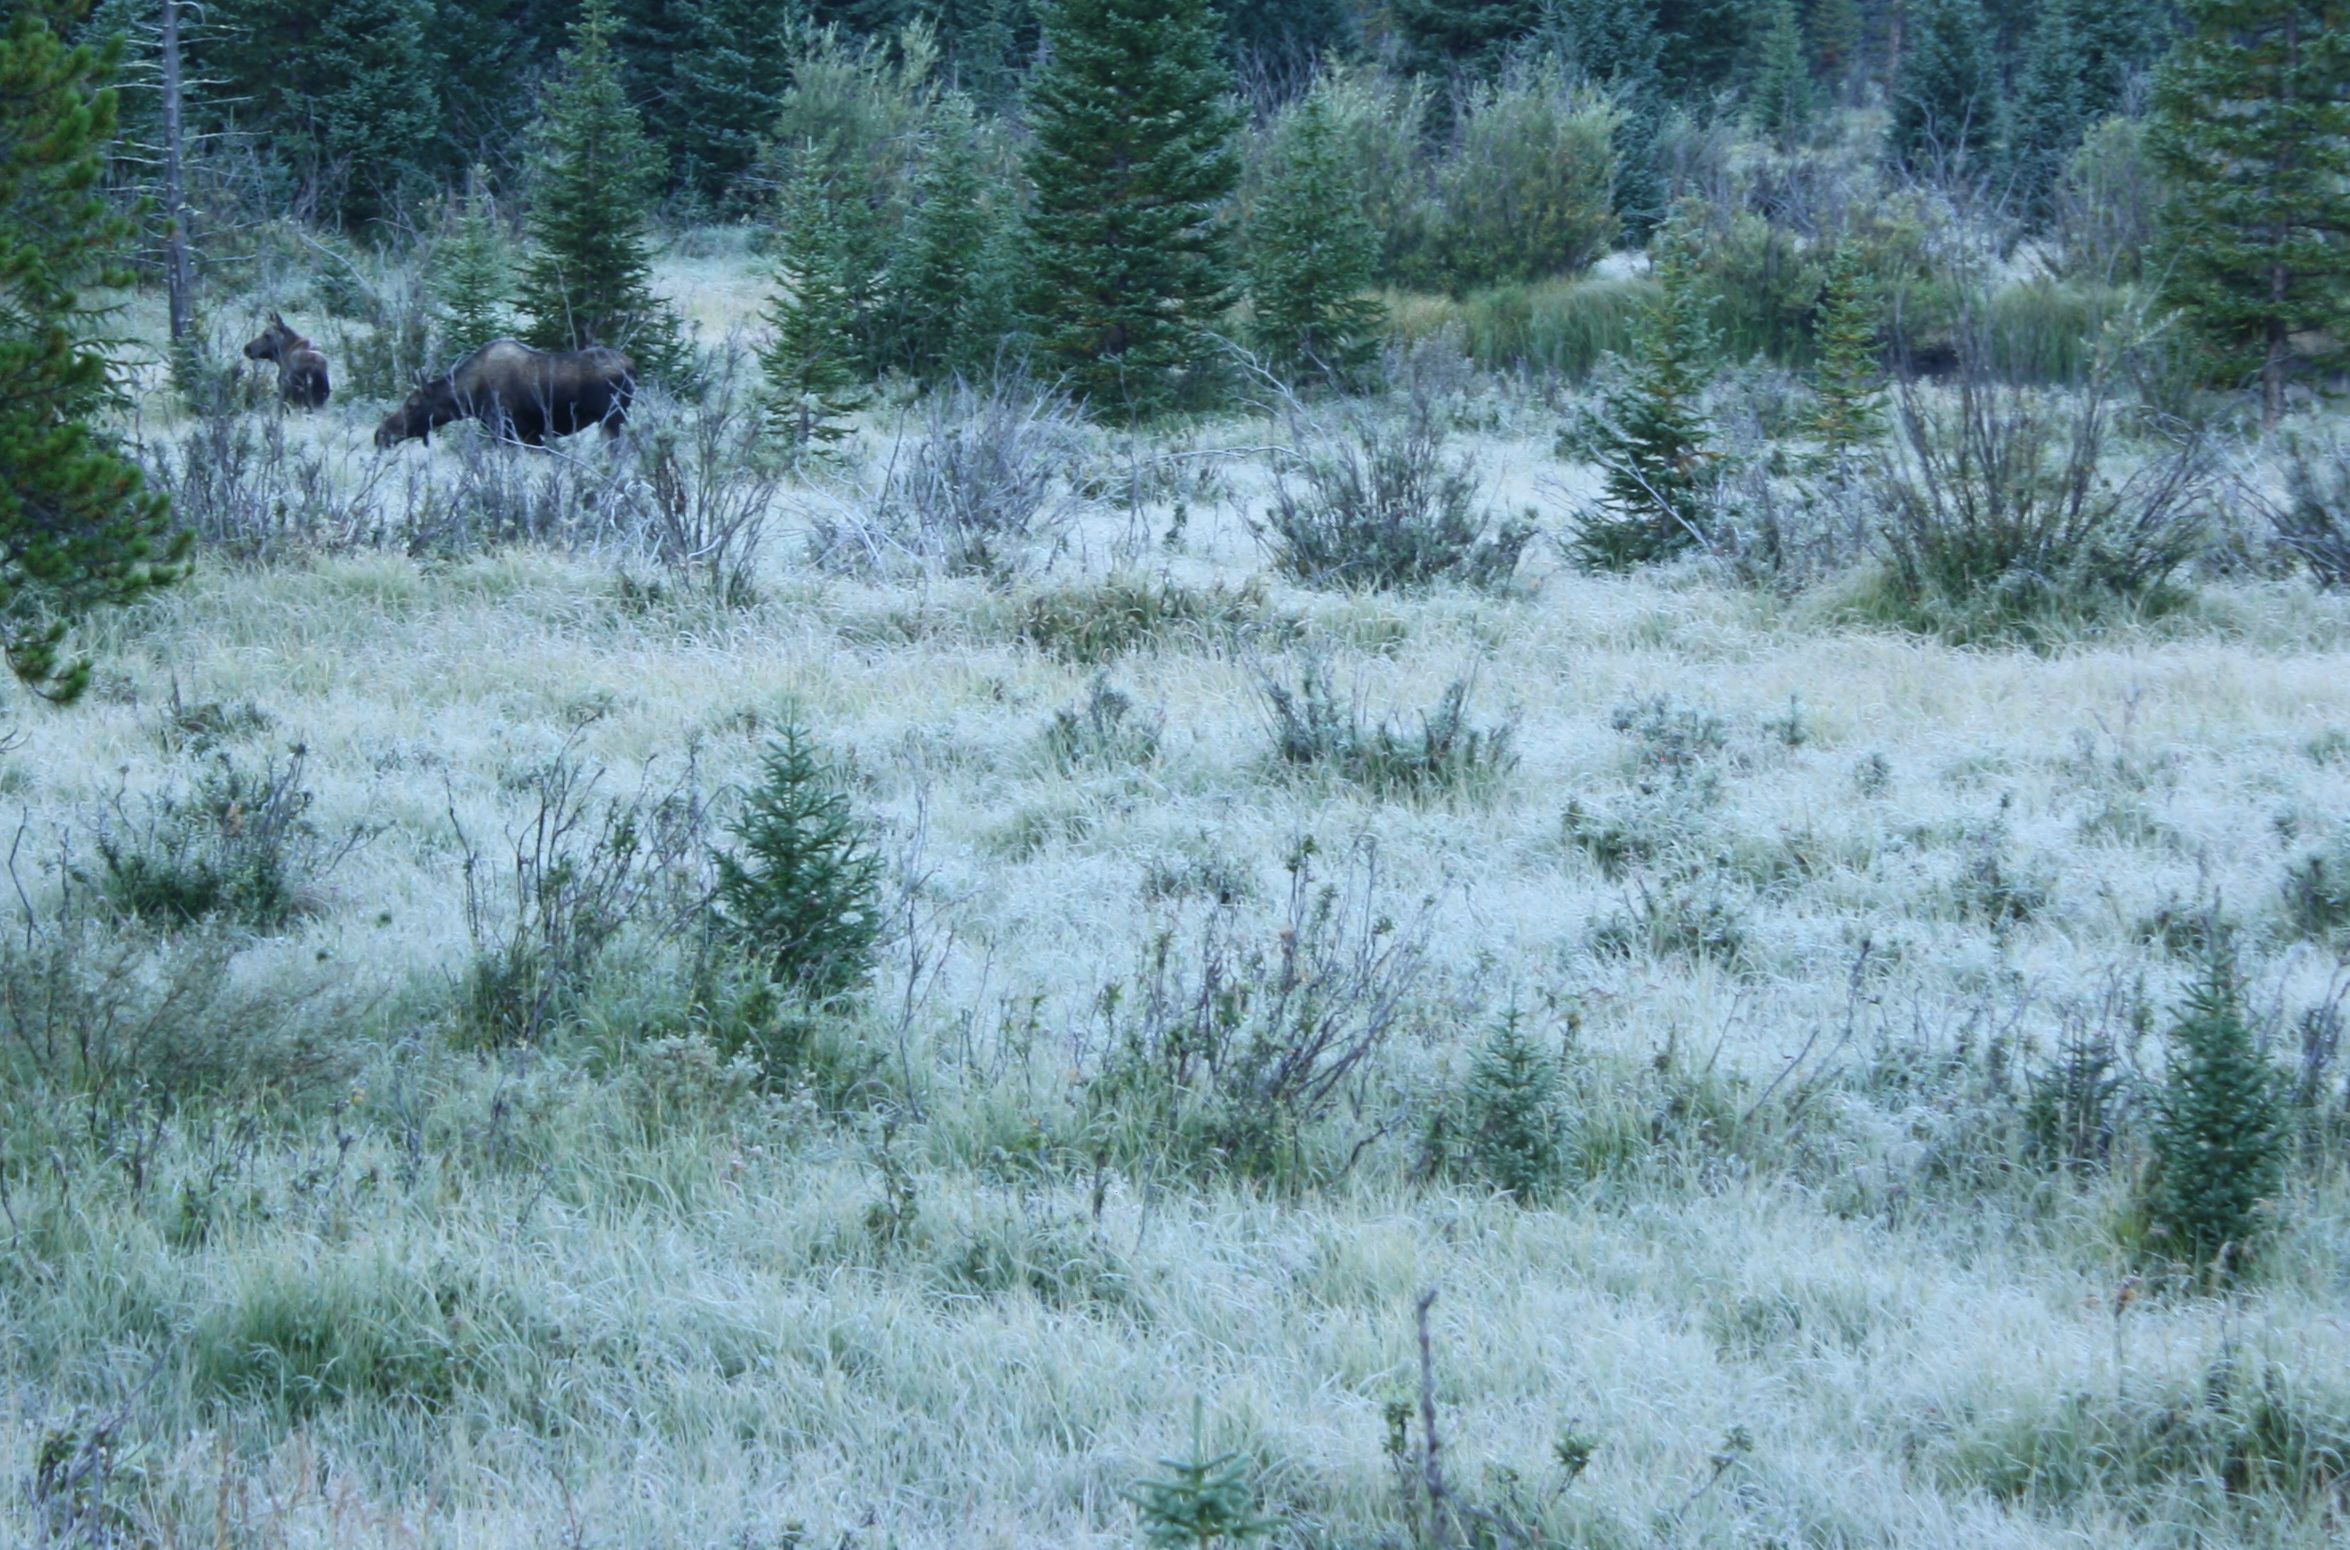 moose momma and calf